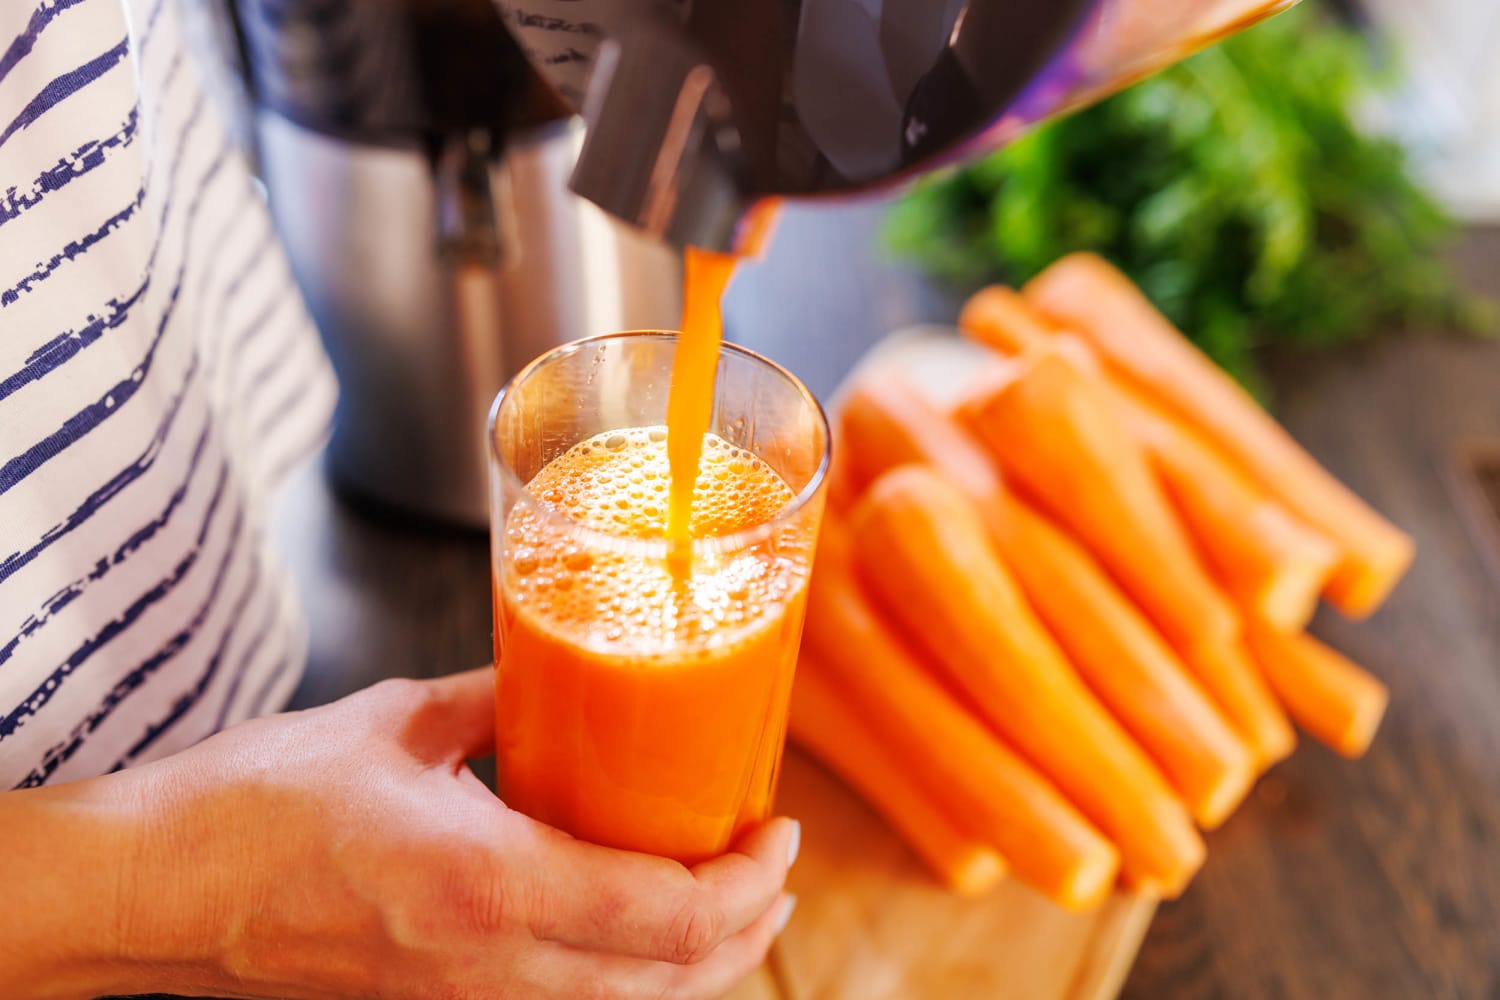 Is eating carrots or drinking carrot juice better for your health? Dietitians explain